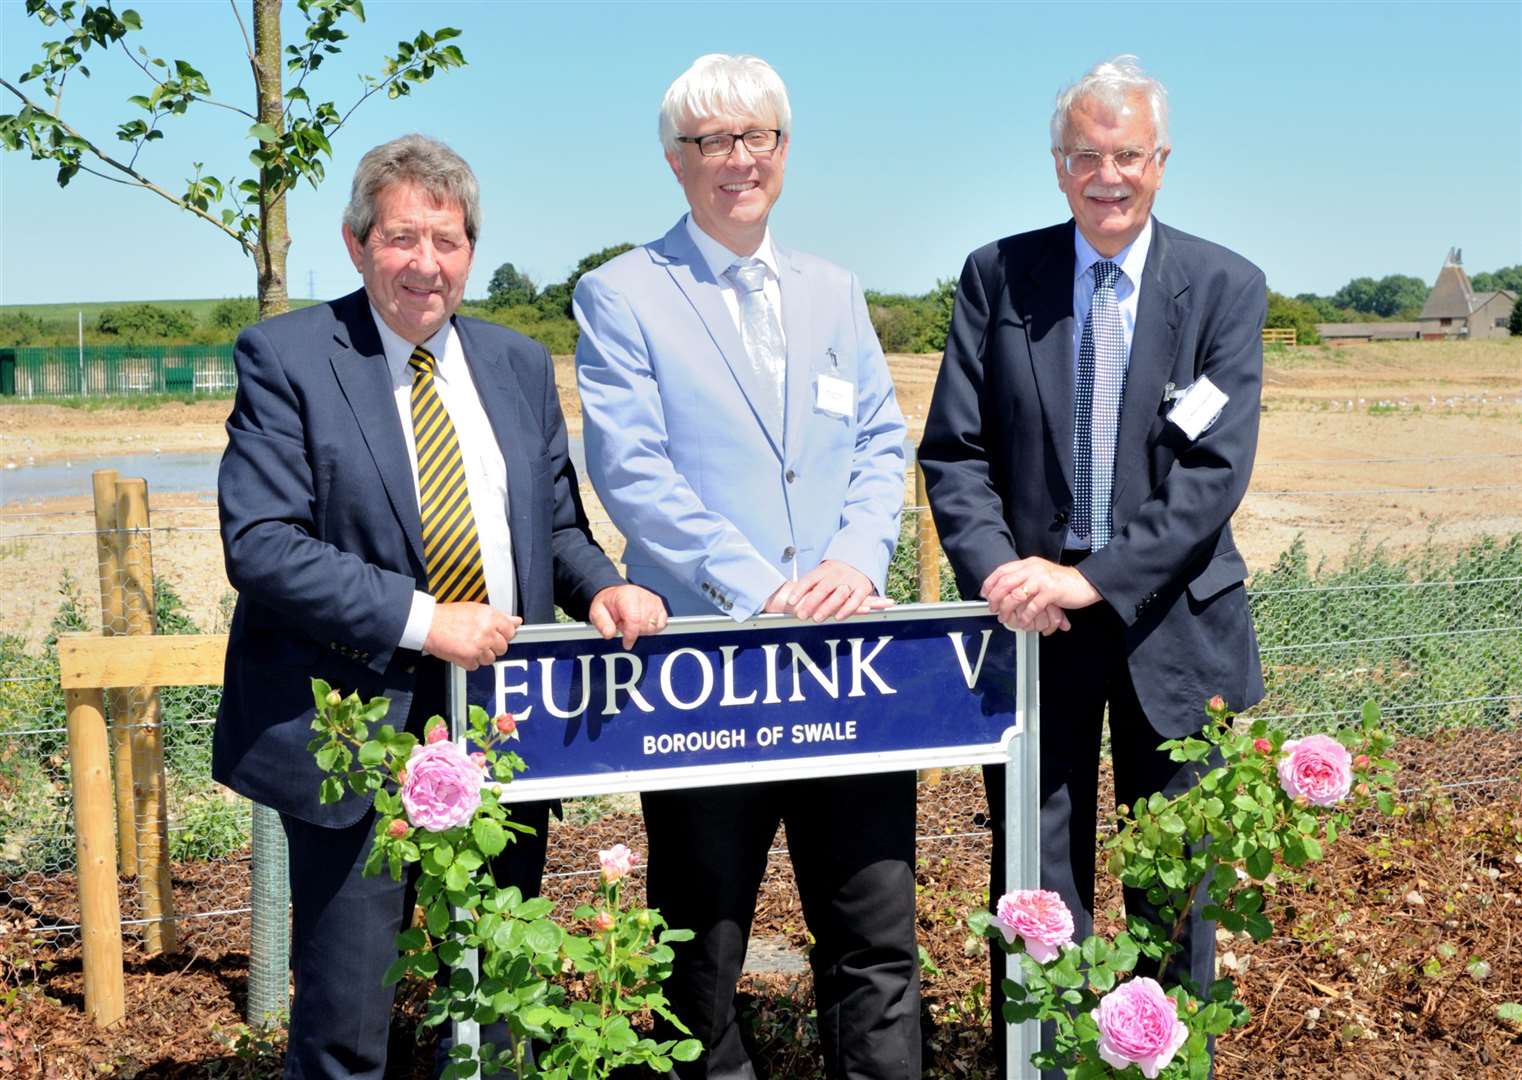 Sittingbourne and Sheppey MP Gordon Henderson, Trenport's Richard Hall and former councillor Mike Cosgrove at the tree planting ceremony in June 2018